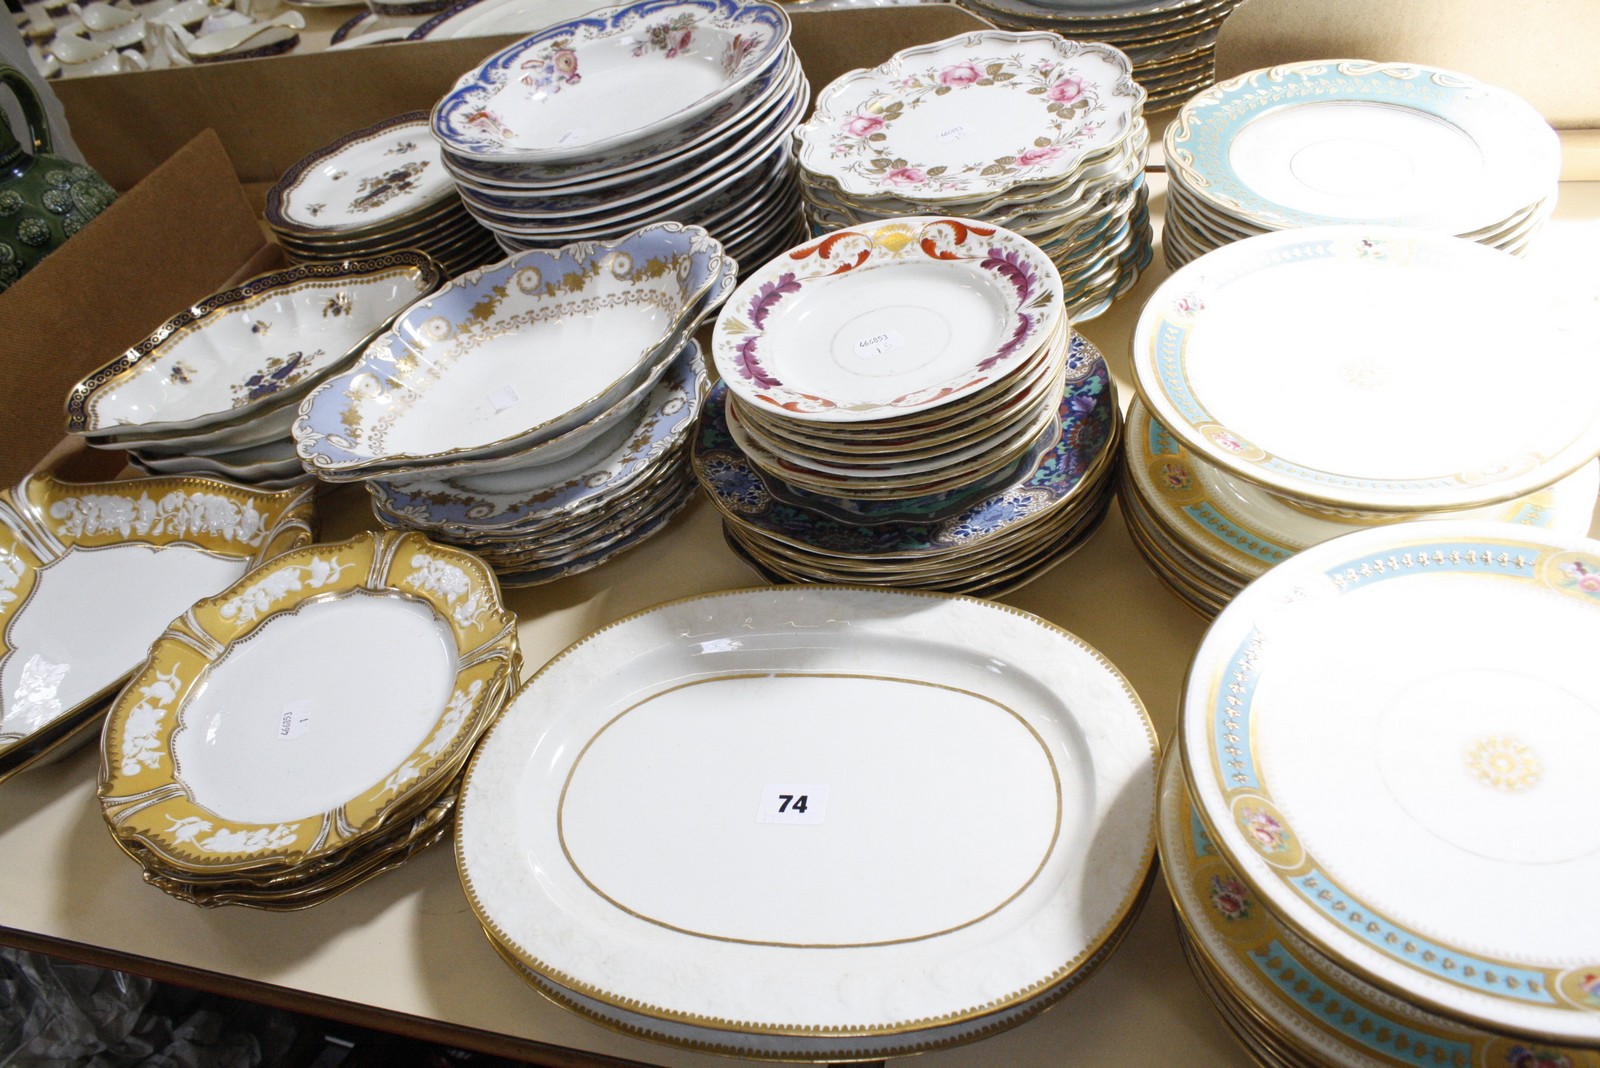 Assorted decorative plates to include Copeland and Garrett dinner plates and bowls, floral